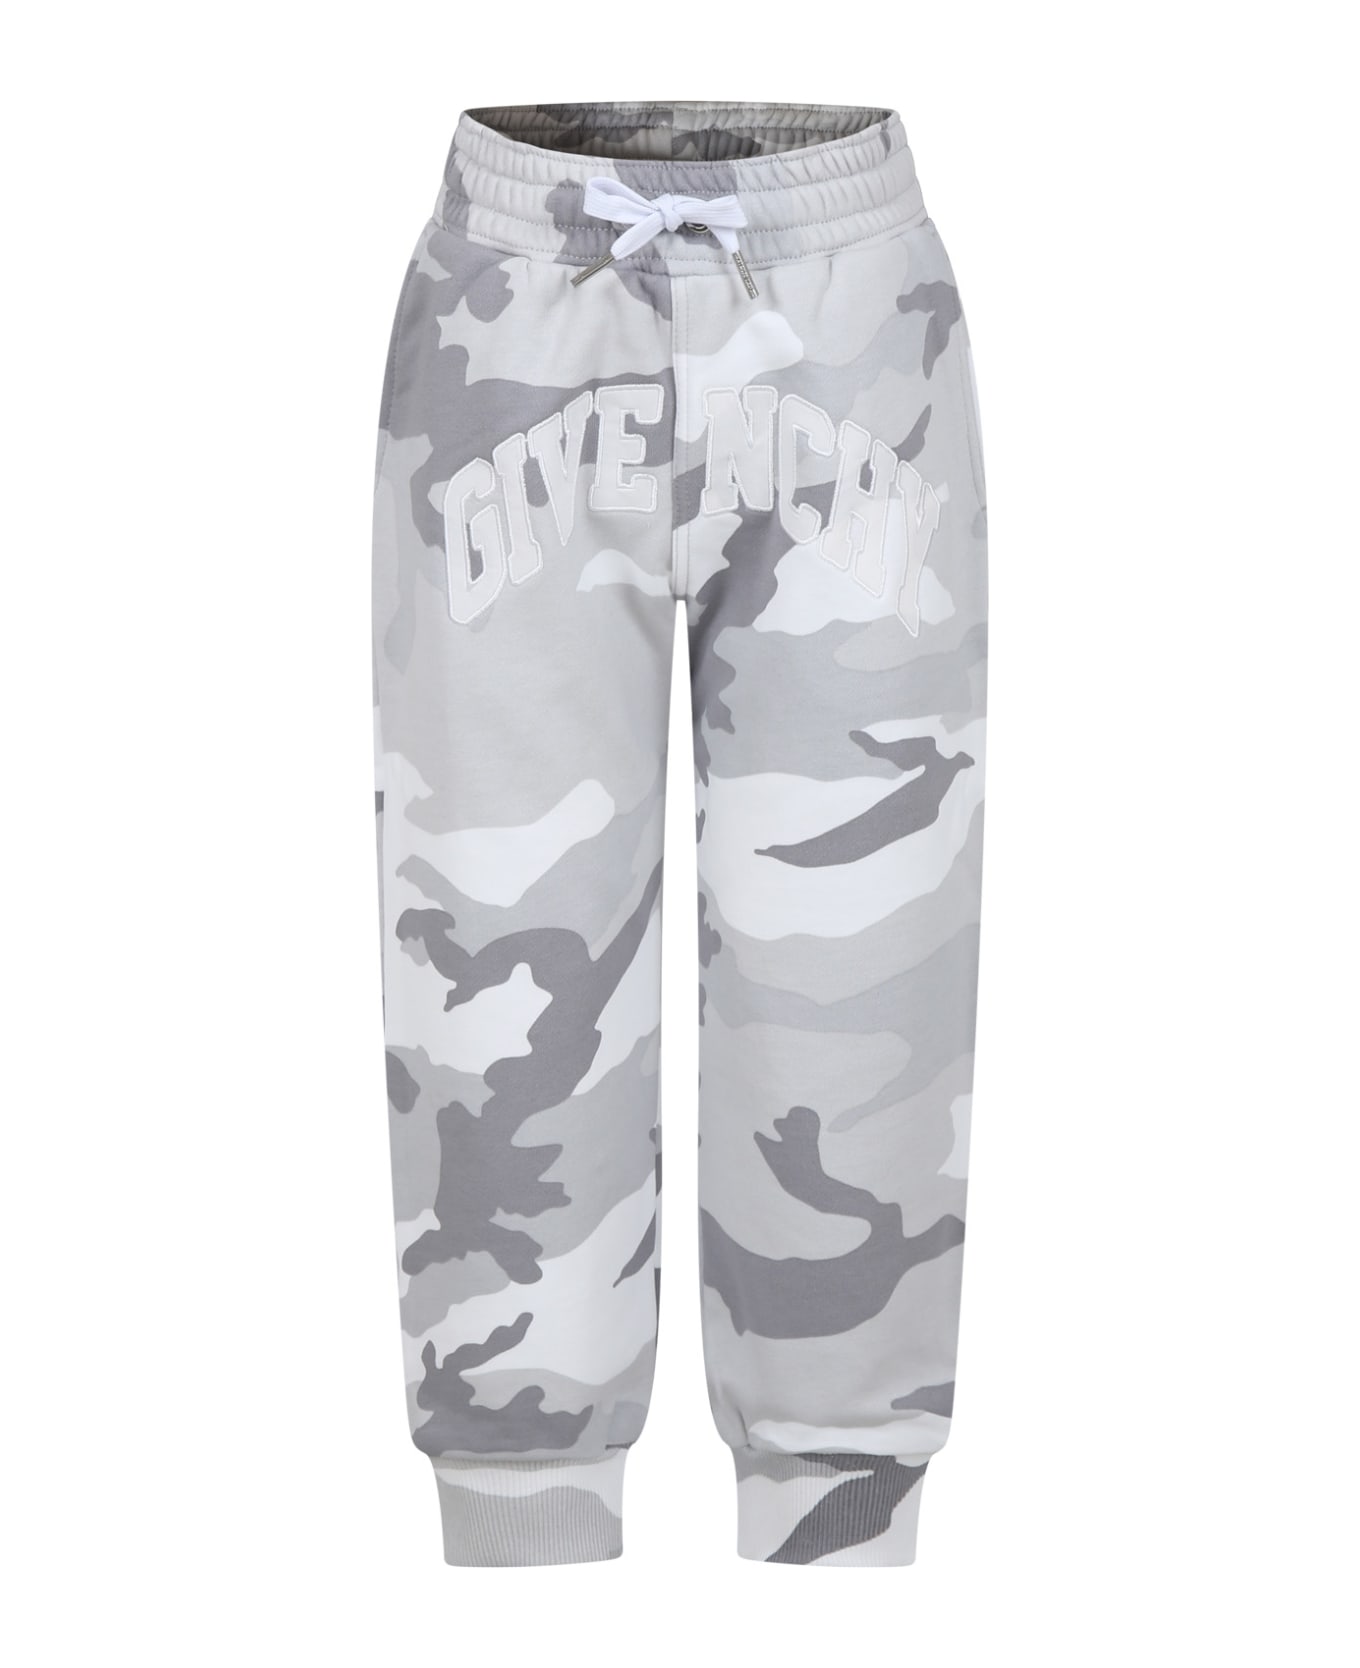 Givenchy Gray Trousers For Kids With Camouflage Pattern - Grey ボトムス